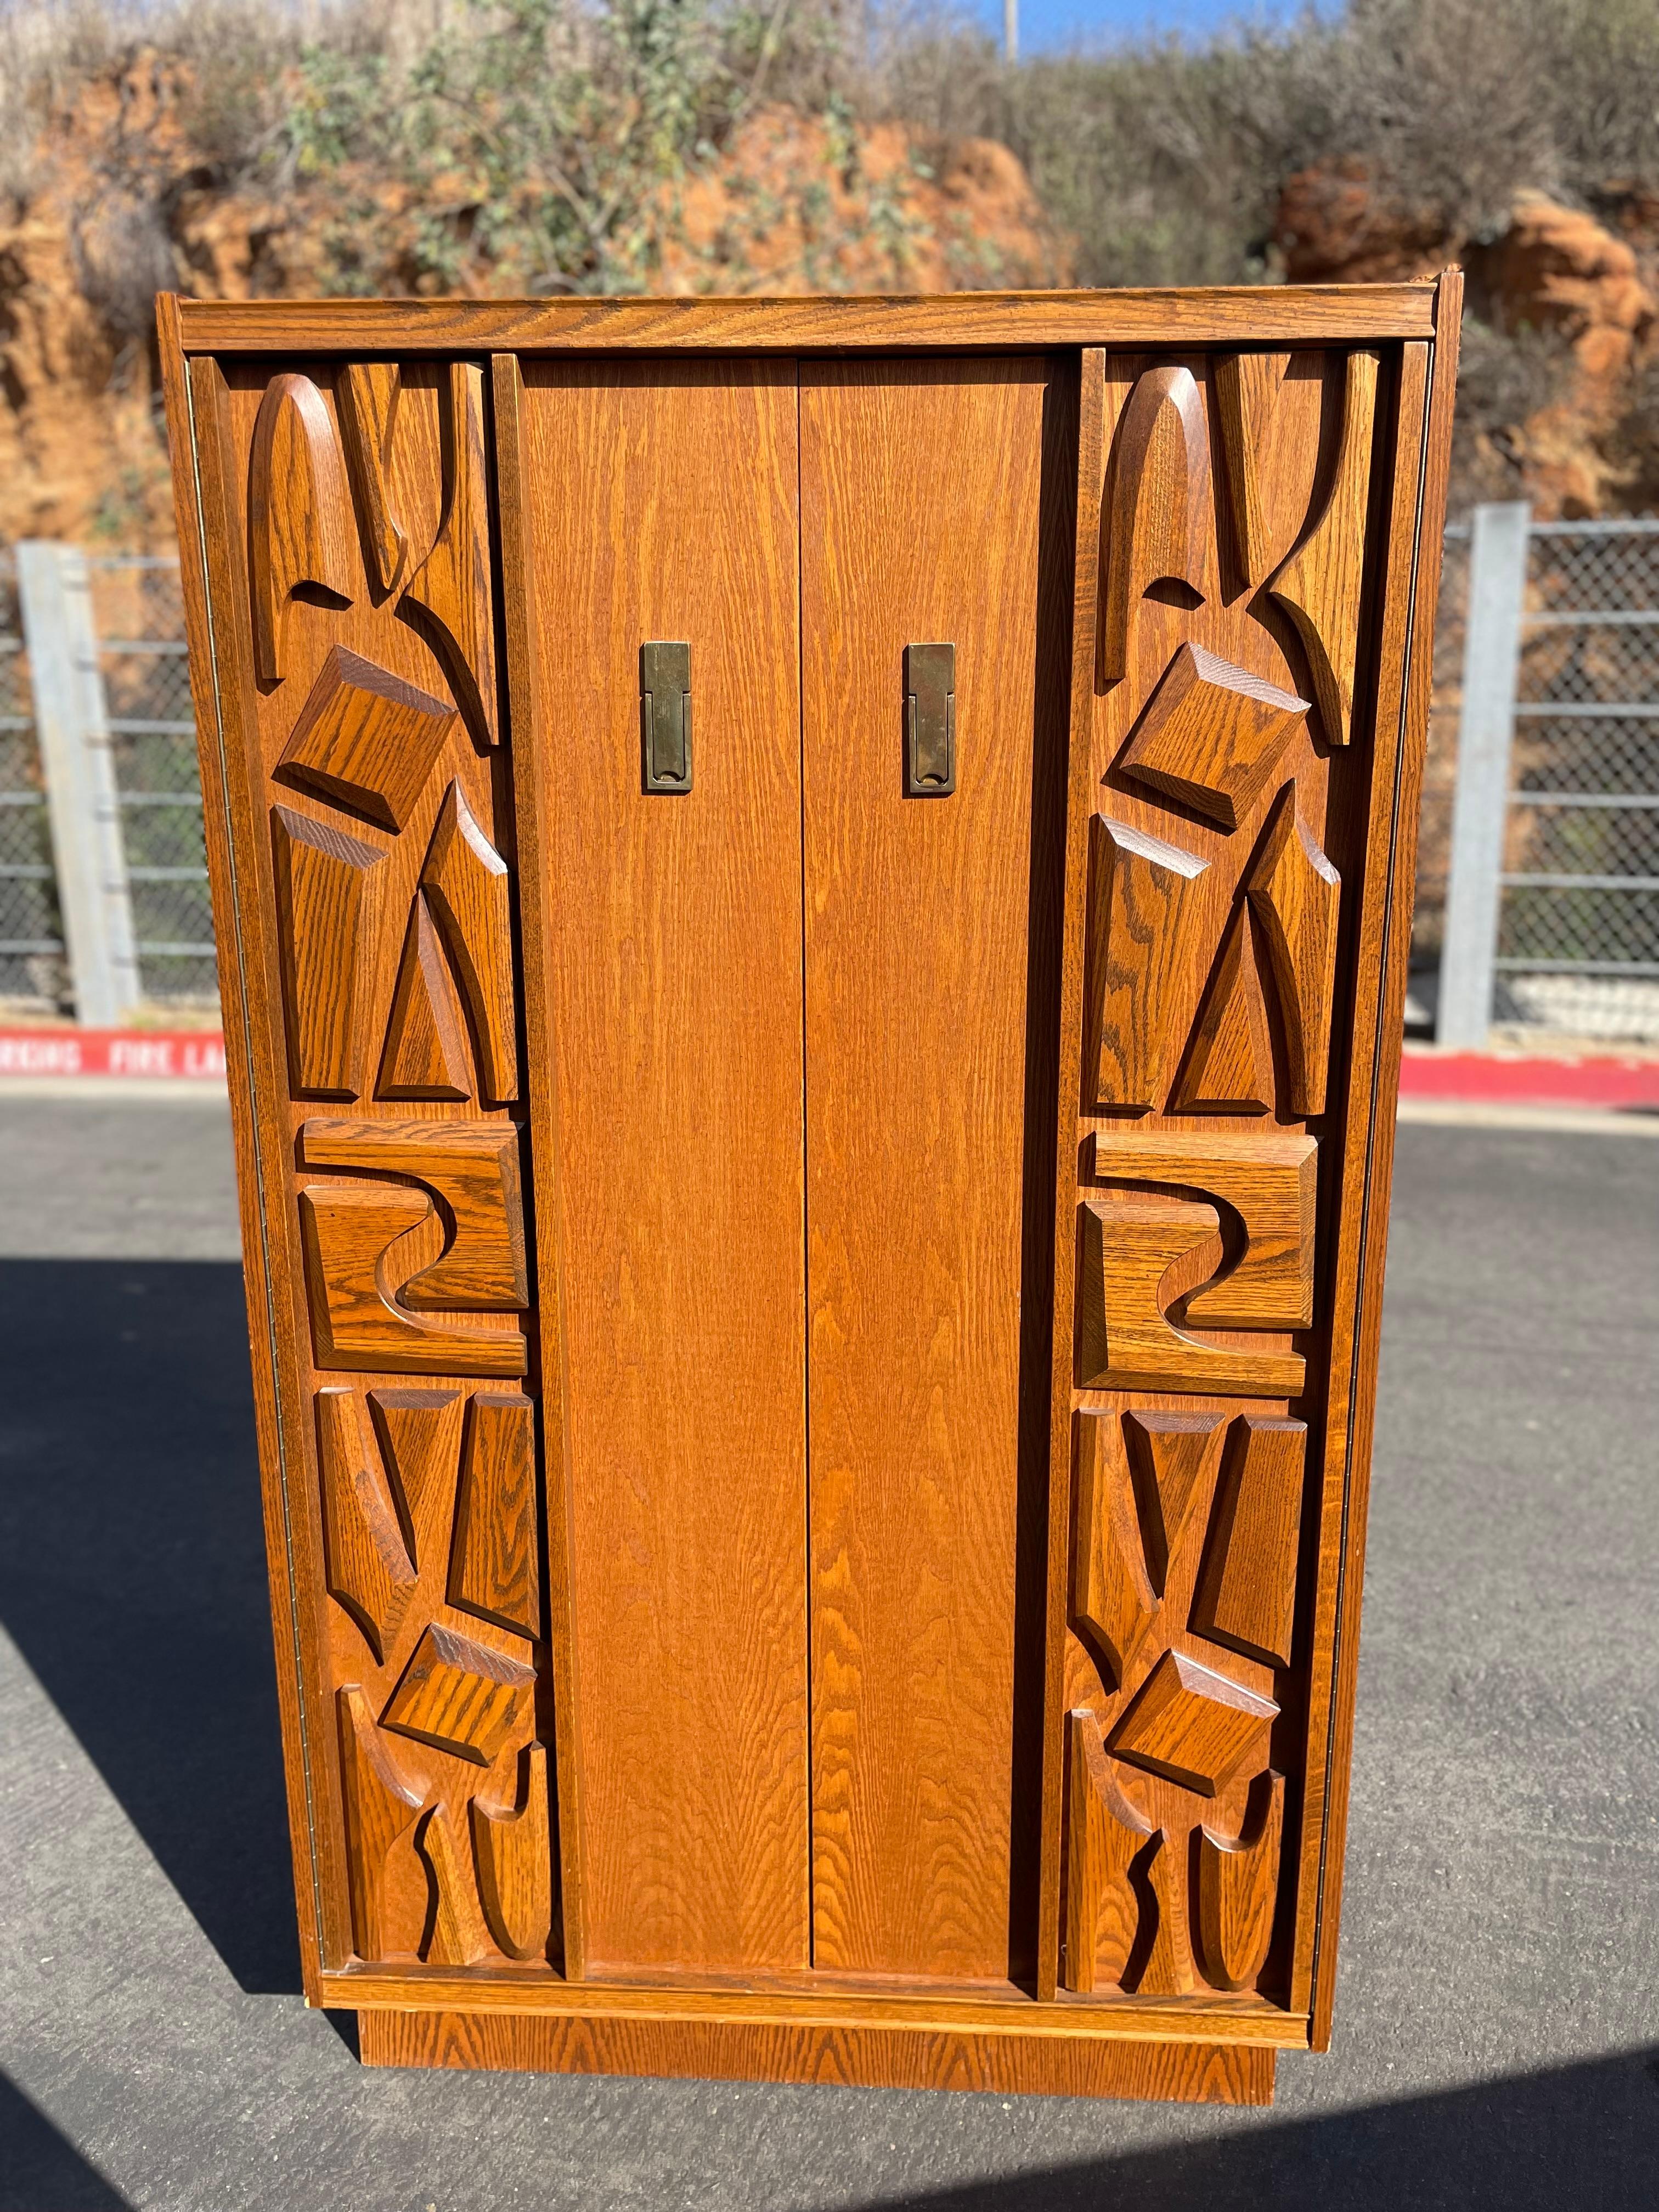 This Canadian brutalist piece is absolutely stunning. Beautifully carved detailing on the front doors. 

Tons of storage space behind the cabinet doors as well as drawer space for additional storage. This could easily be converted to a dry bar to